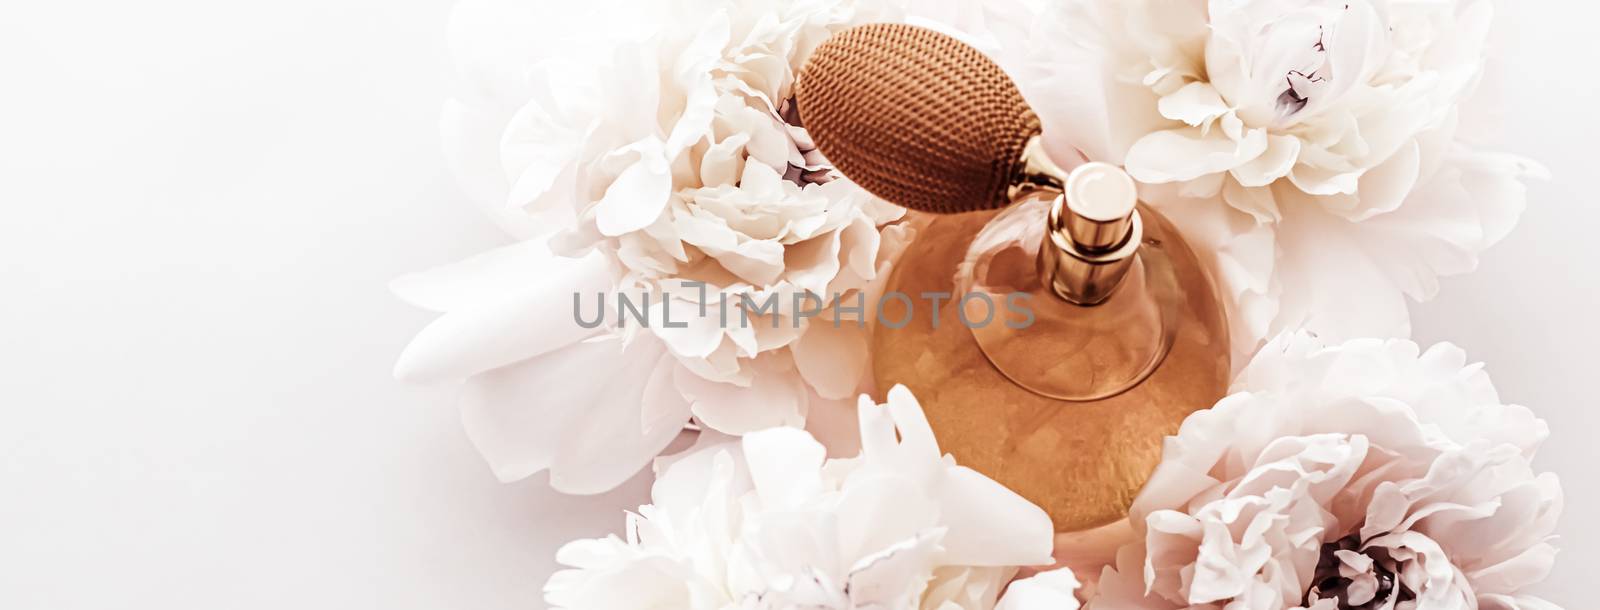 Fragrance bottle as vintage perfume product on background of peony flowers, parfum ad and beauty branding design